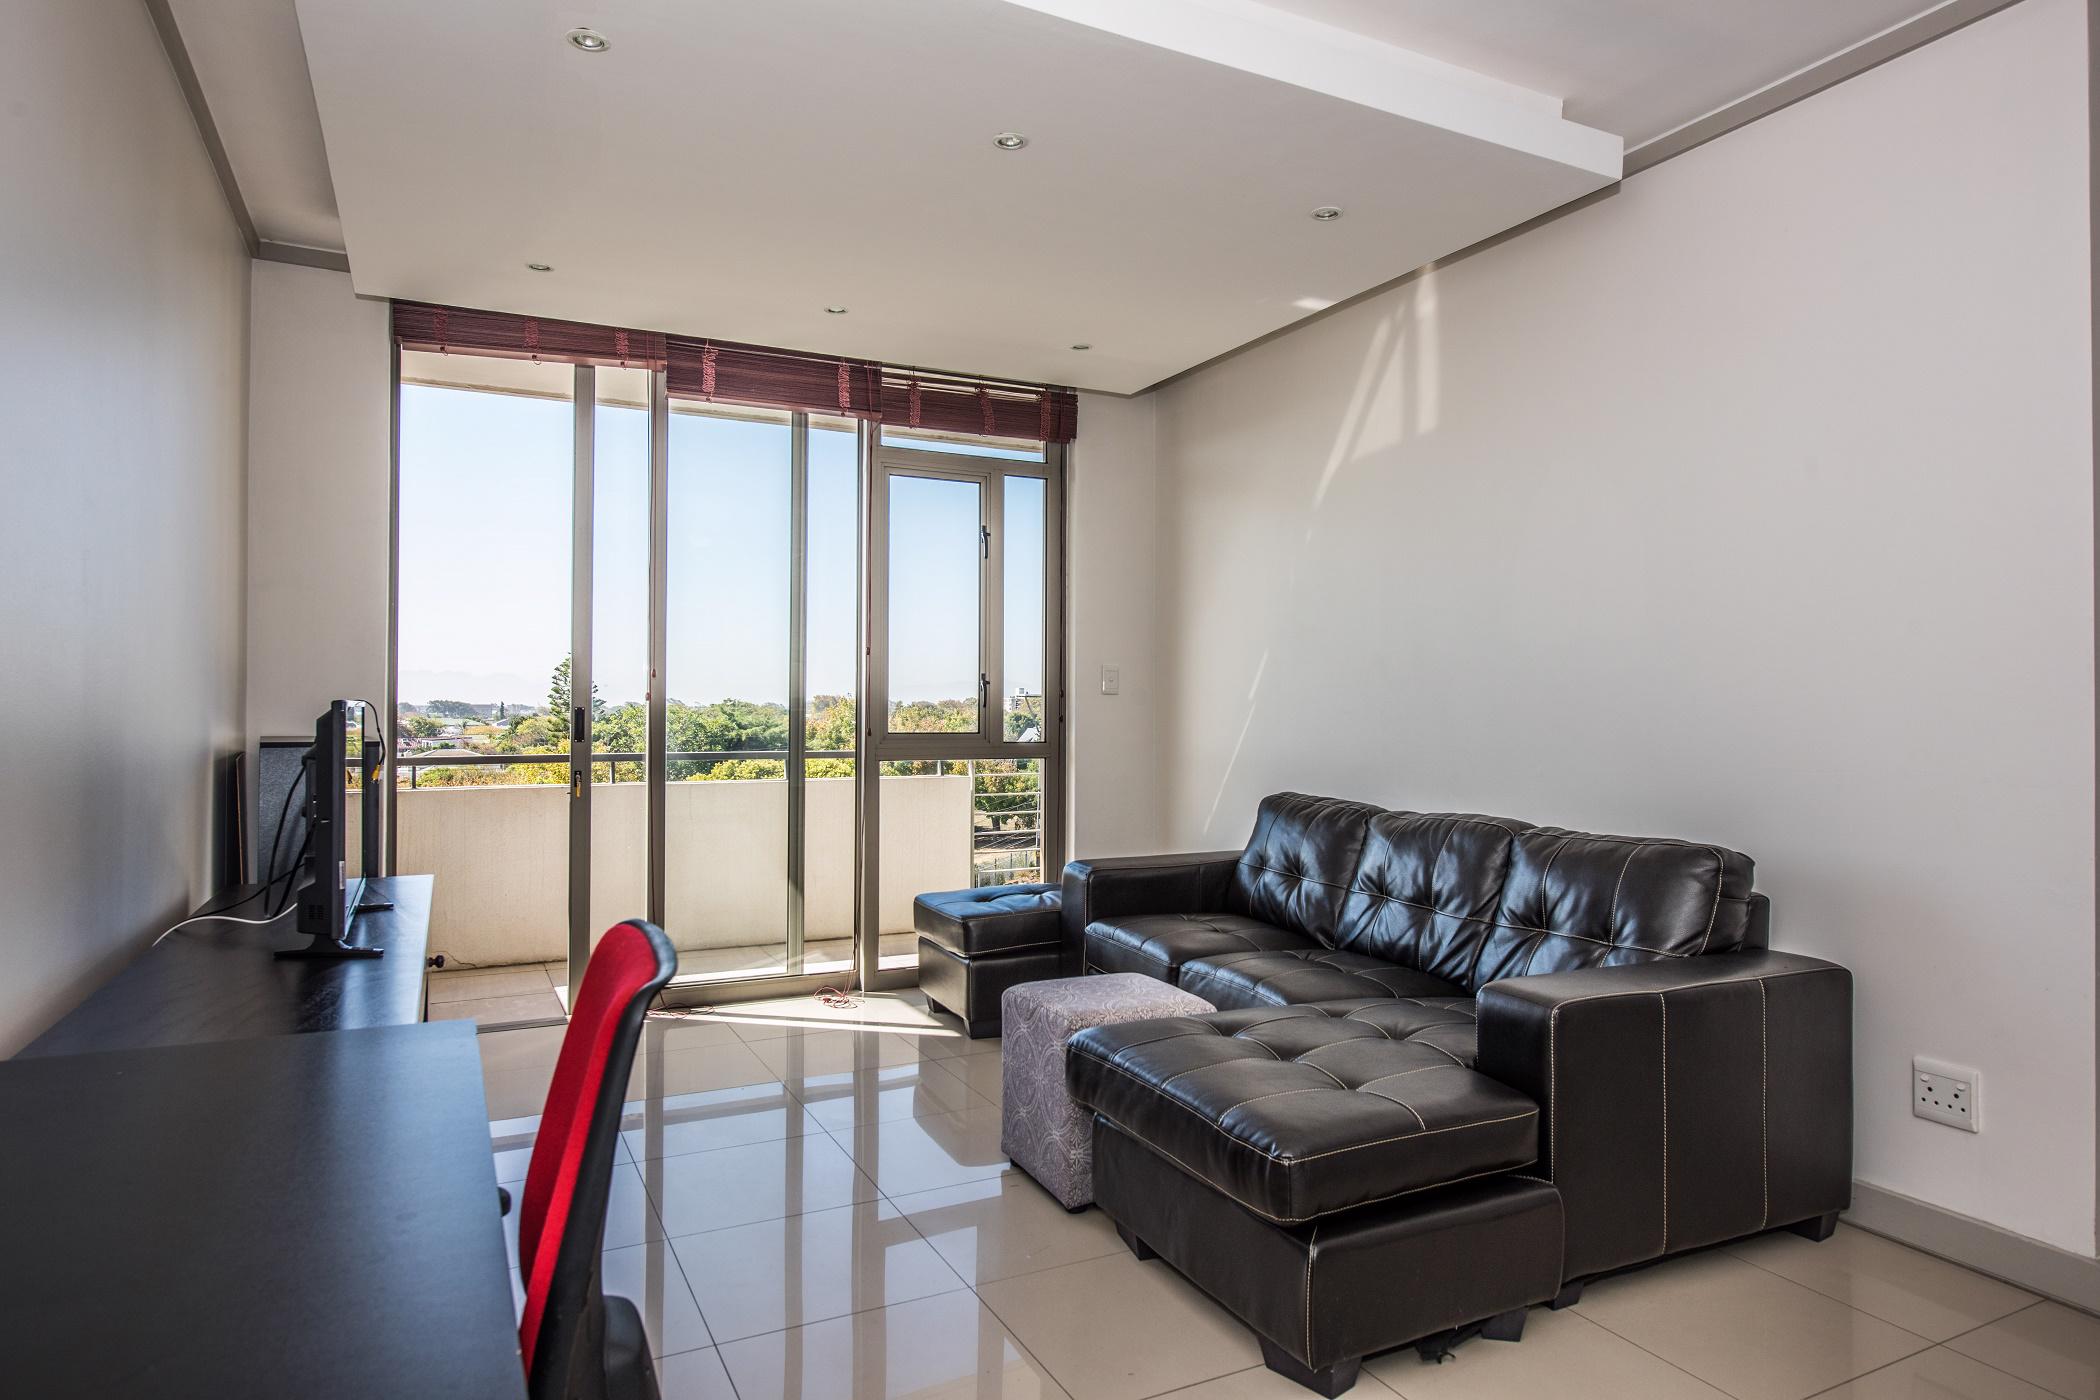 1 bedroom apartment to rent in Claremont (Cape Town)